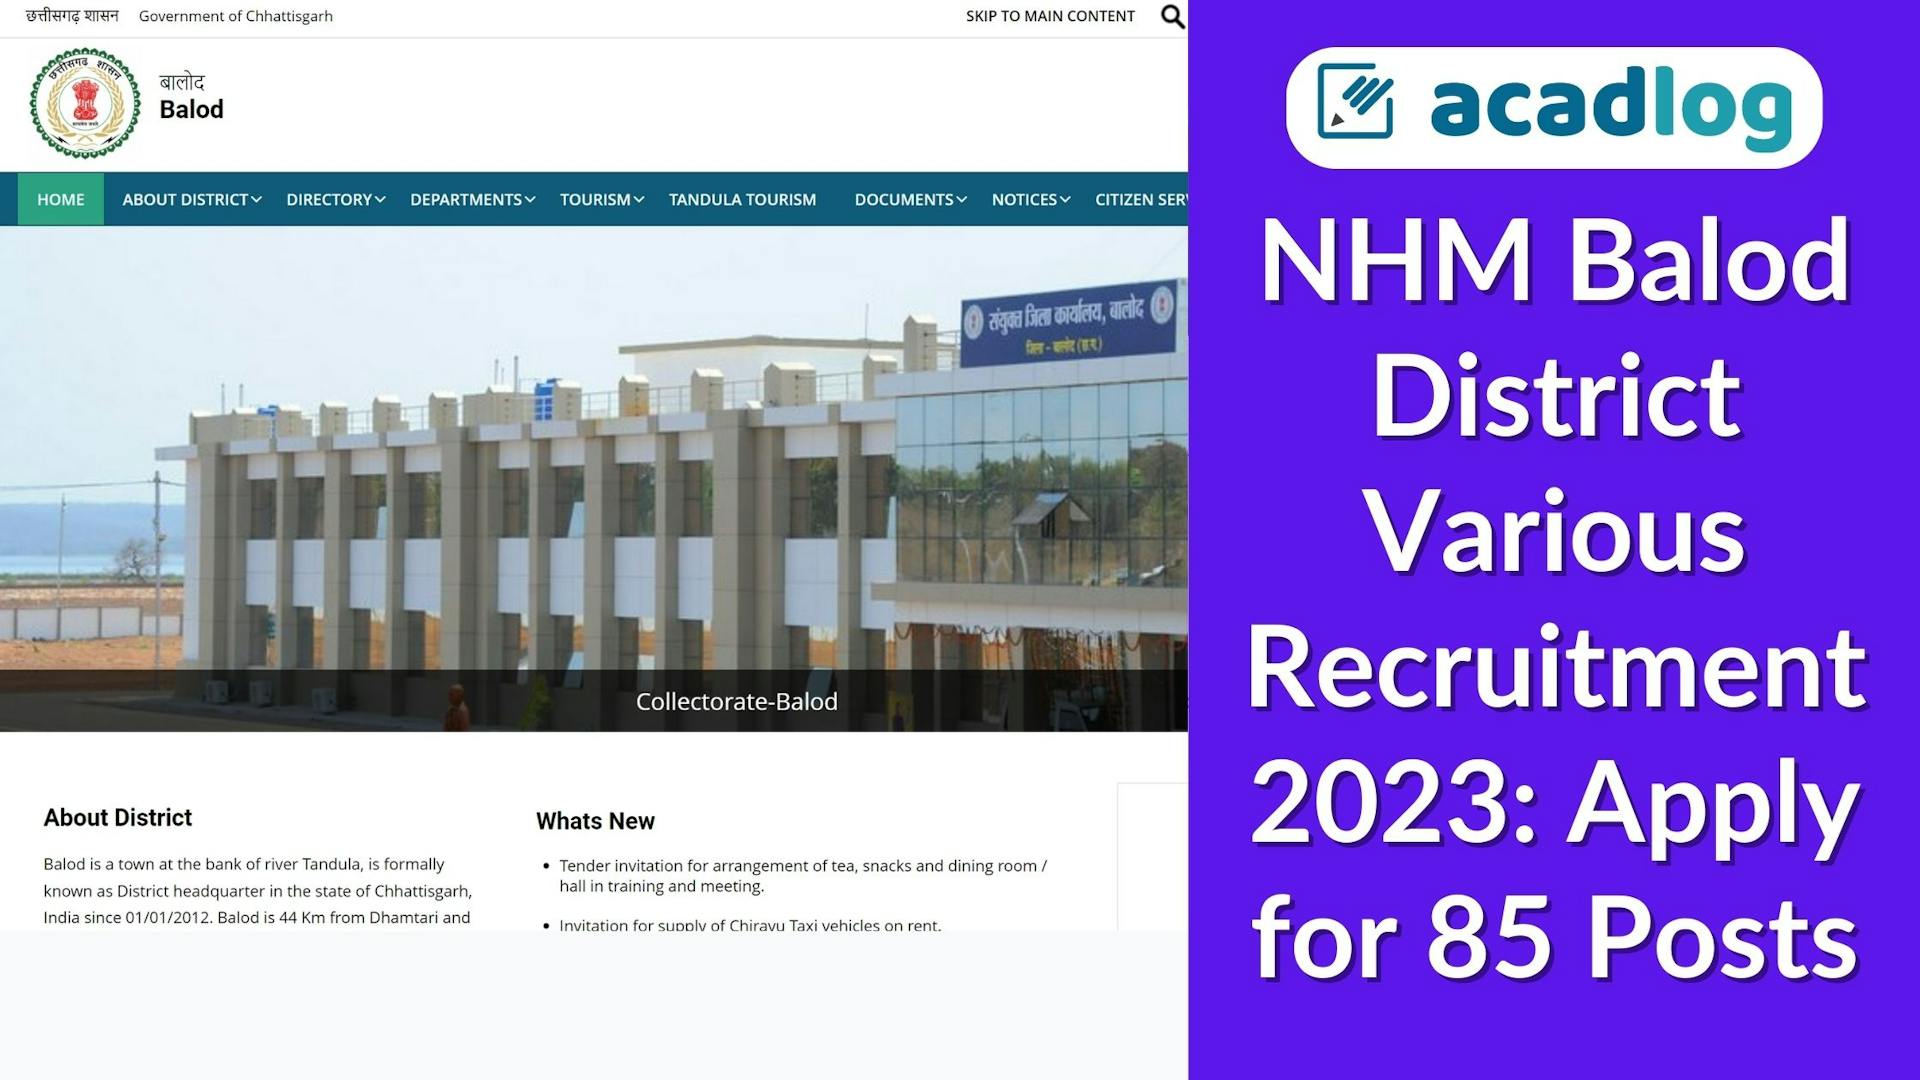 NHM Balod District Various Recruitment 2023: Apply for 85 Posts